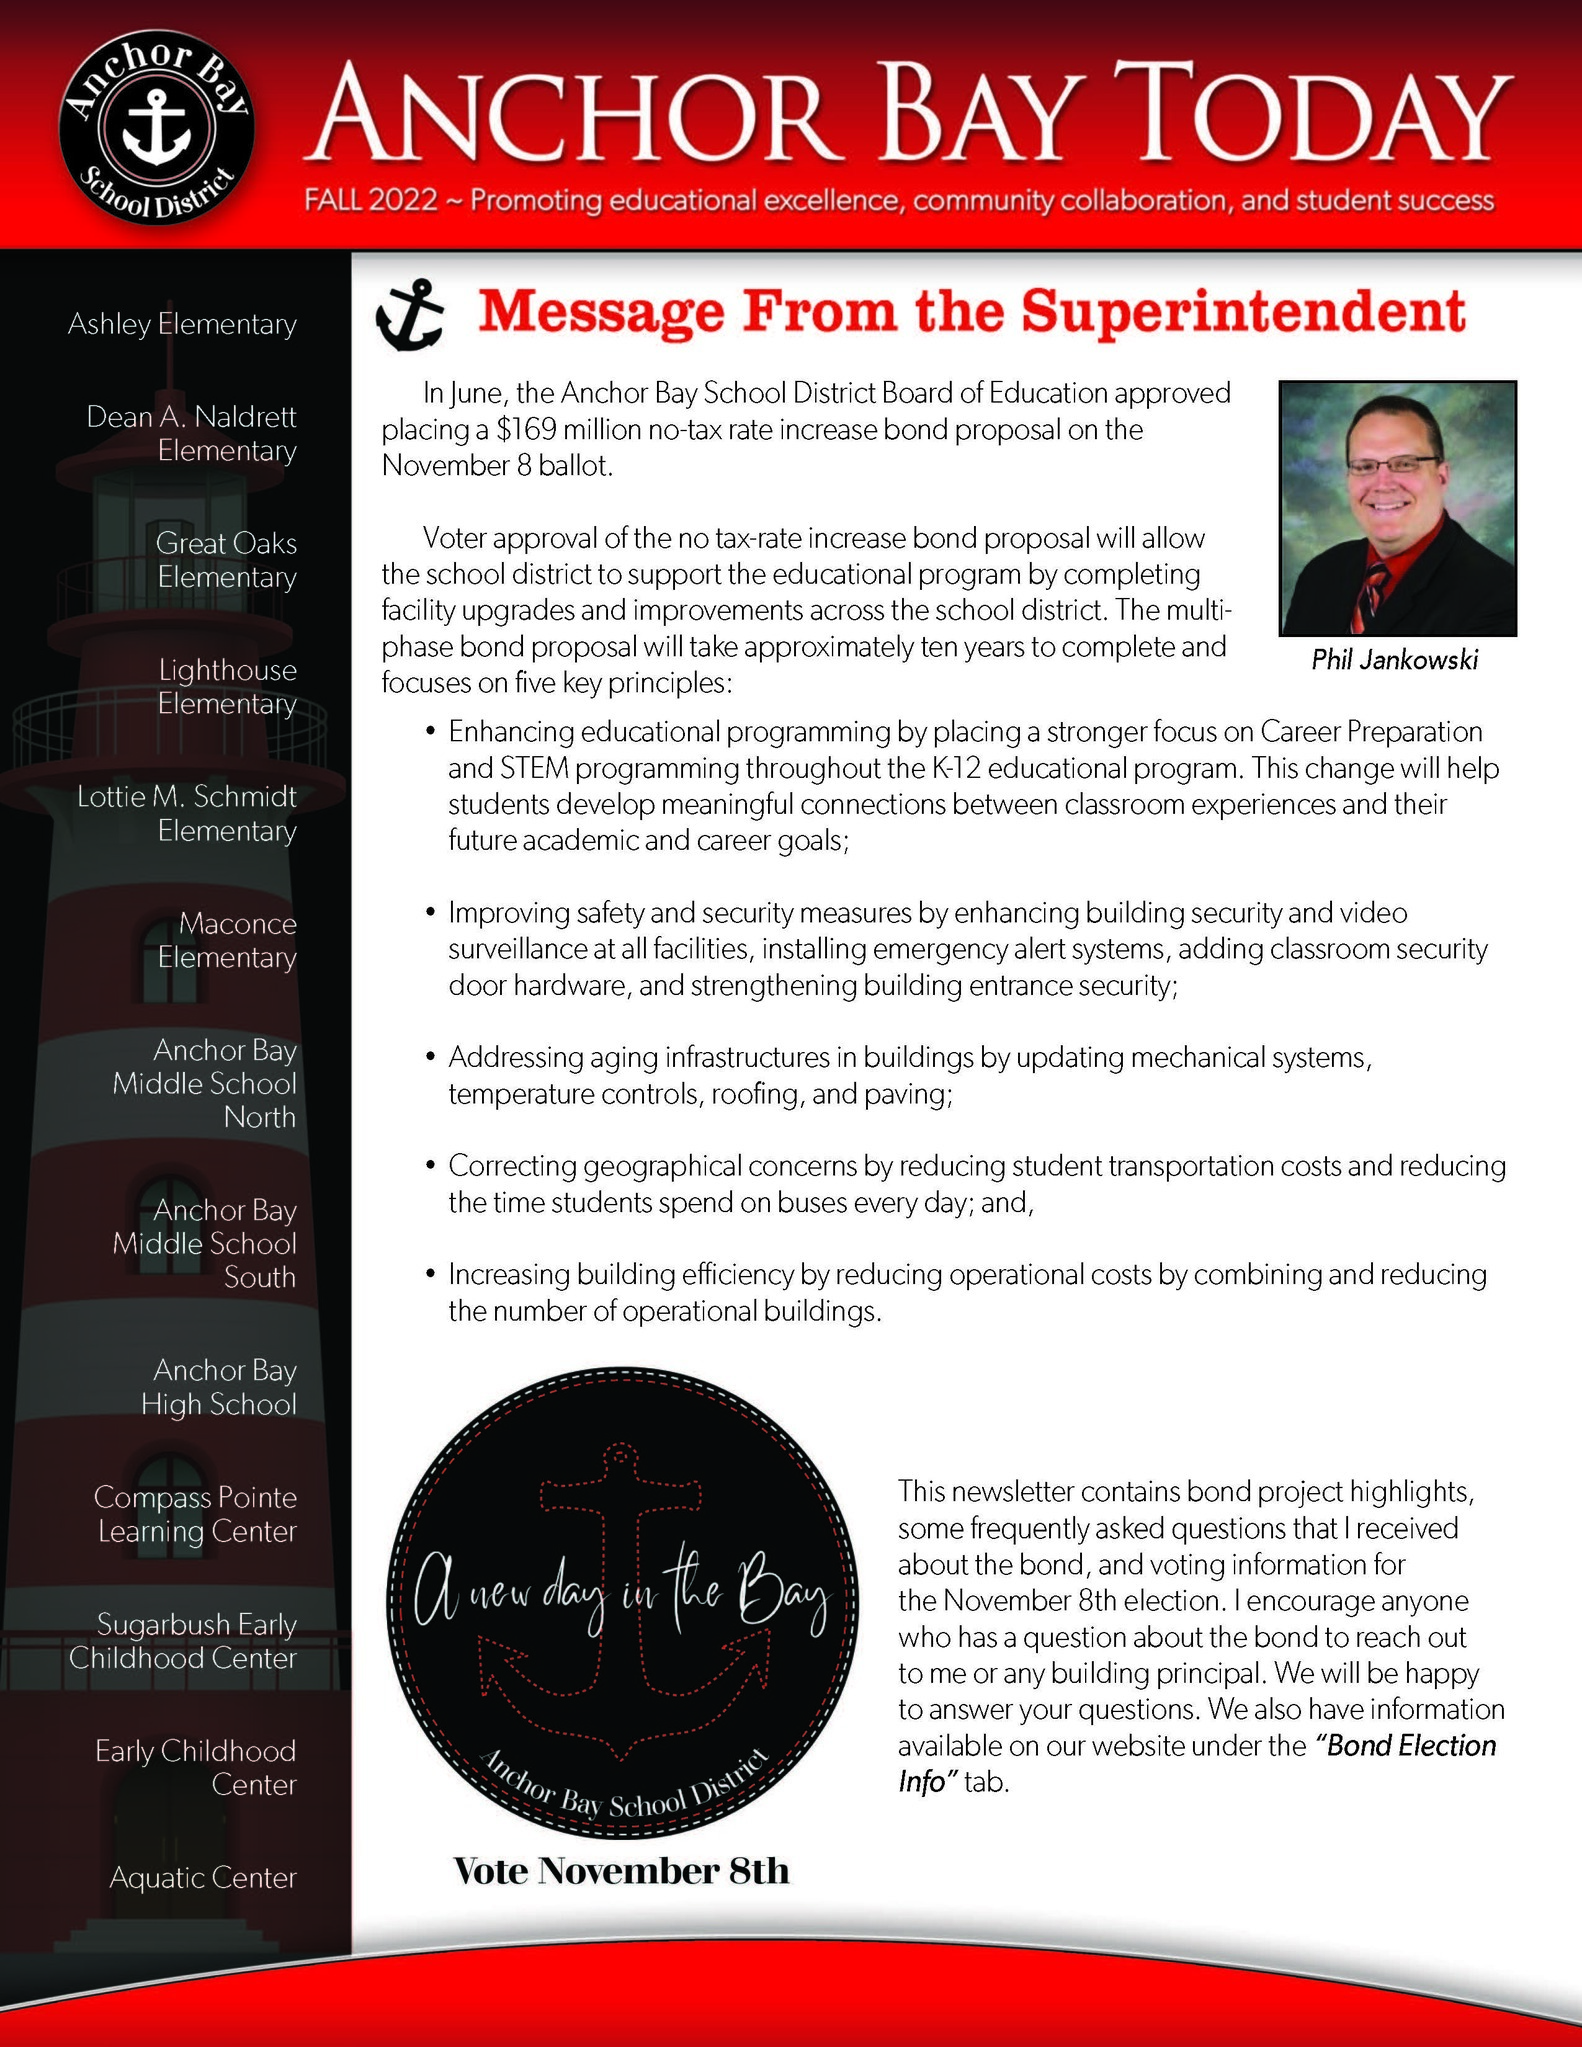 Screen shot of the front page of the community newsletter